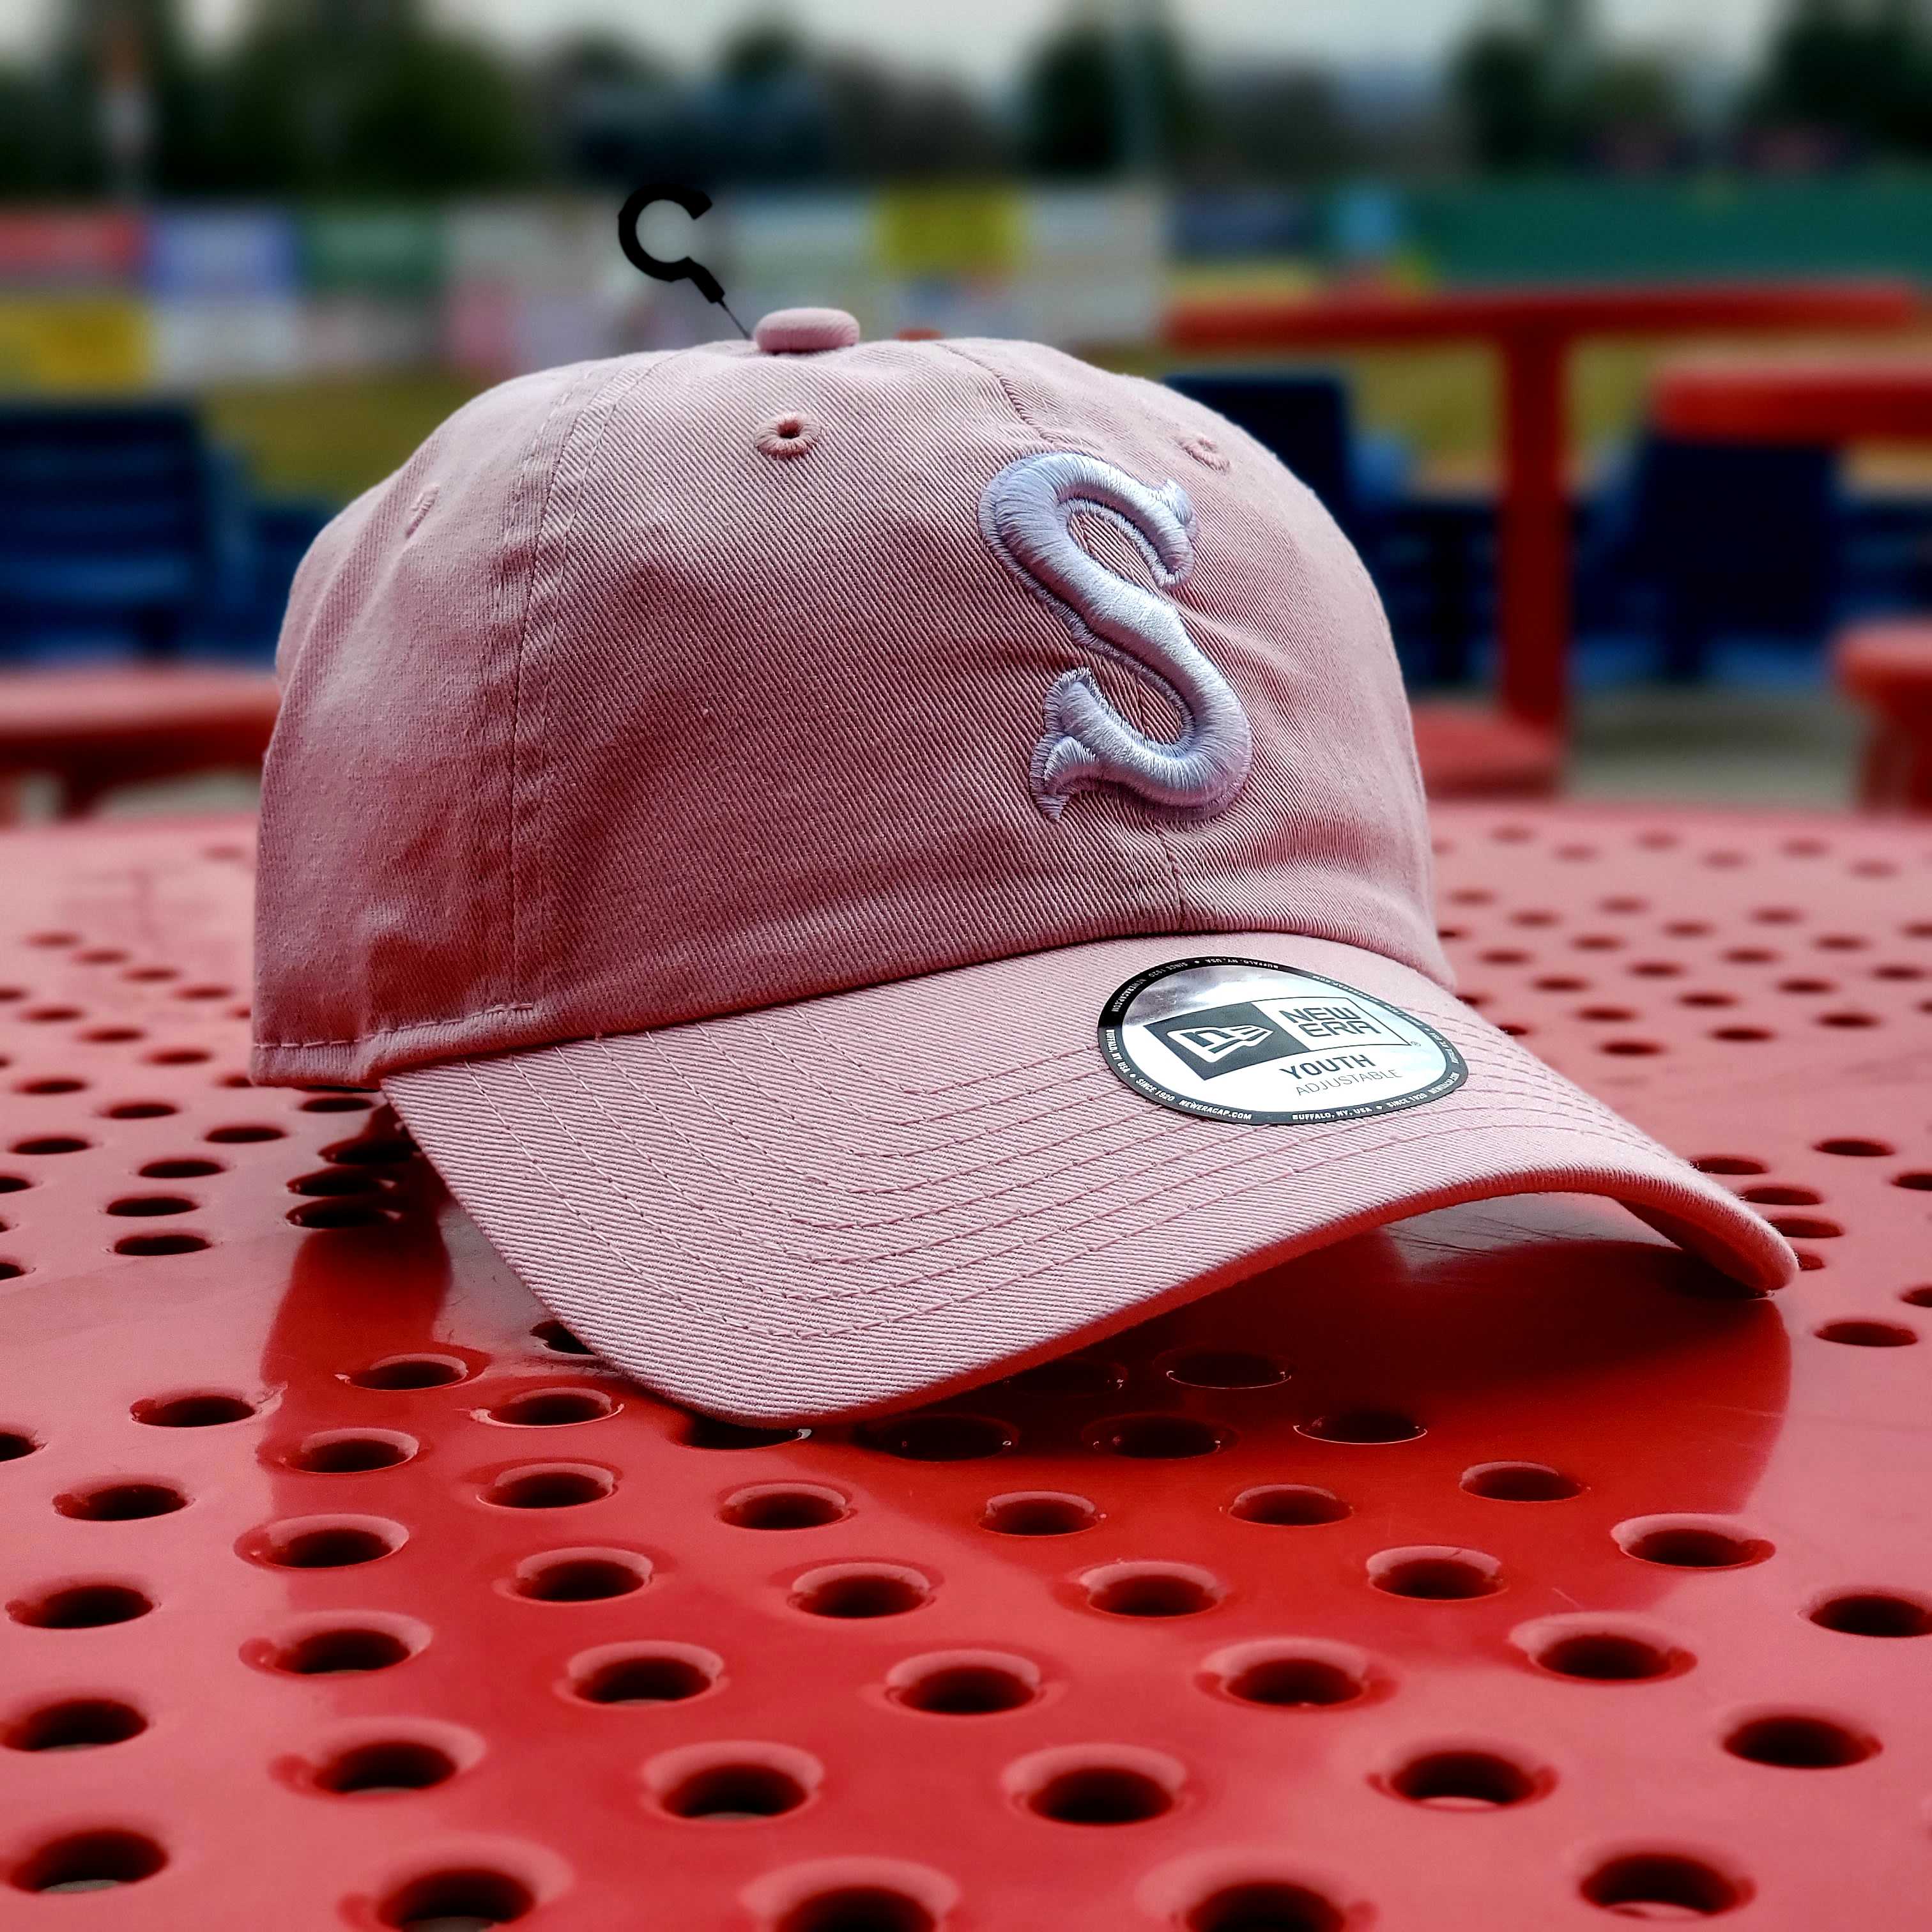 New Era Pink Youth Casual Classic Adjustable Cap